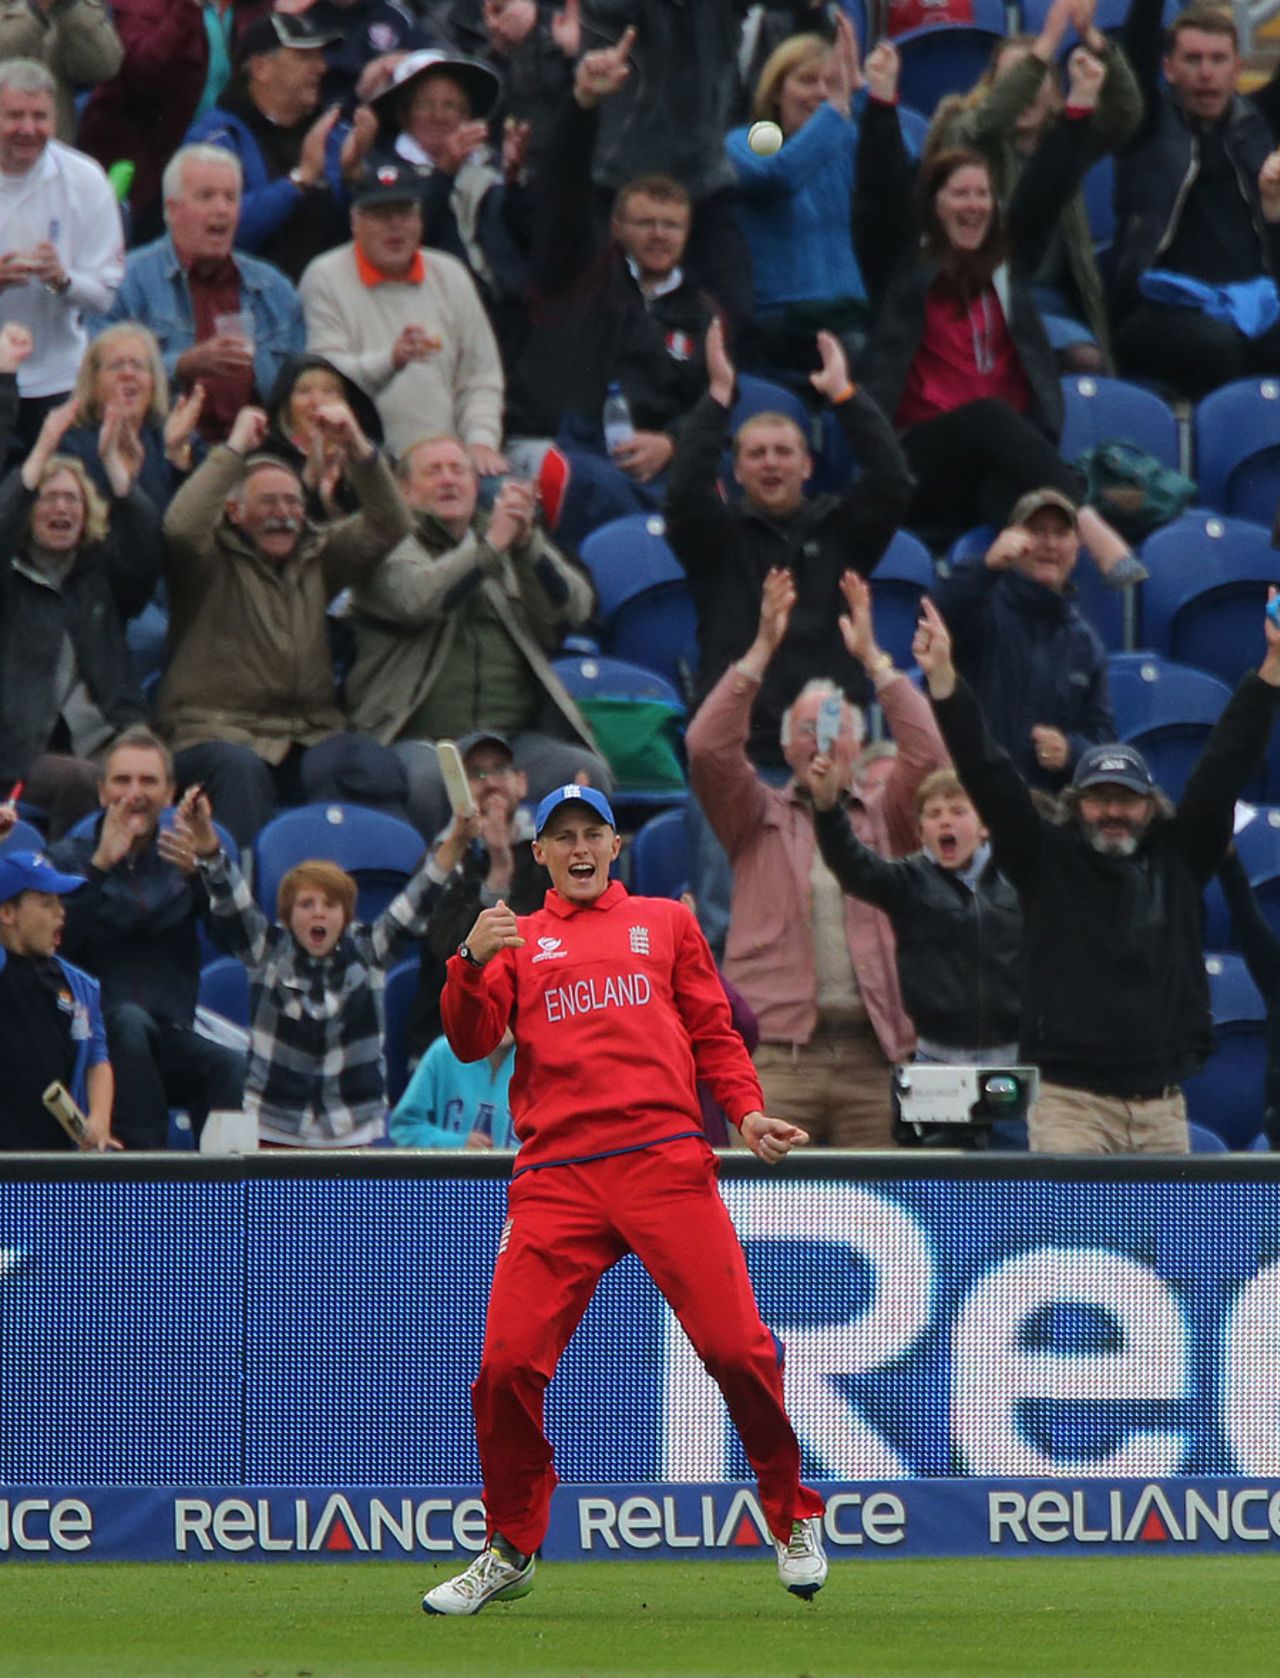 Joe Root celebrates his catch to remove Brendon McCullum, England v New Zealand, Champions Trophy, Group A, Cardiff, June 16, 2013